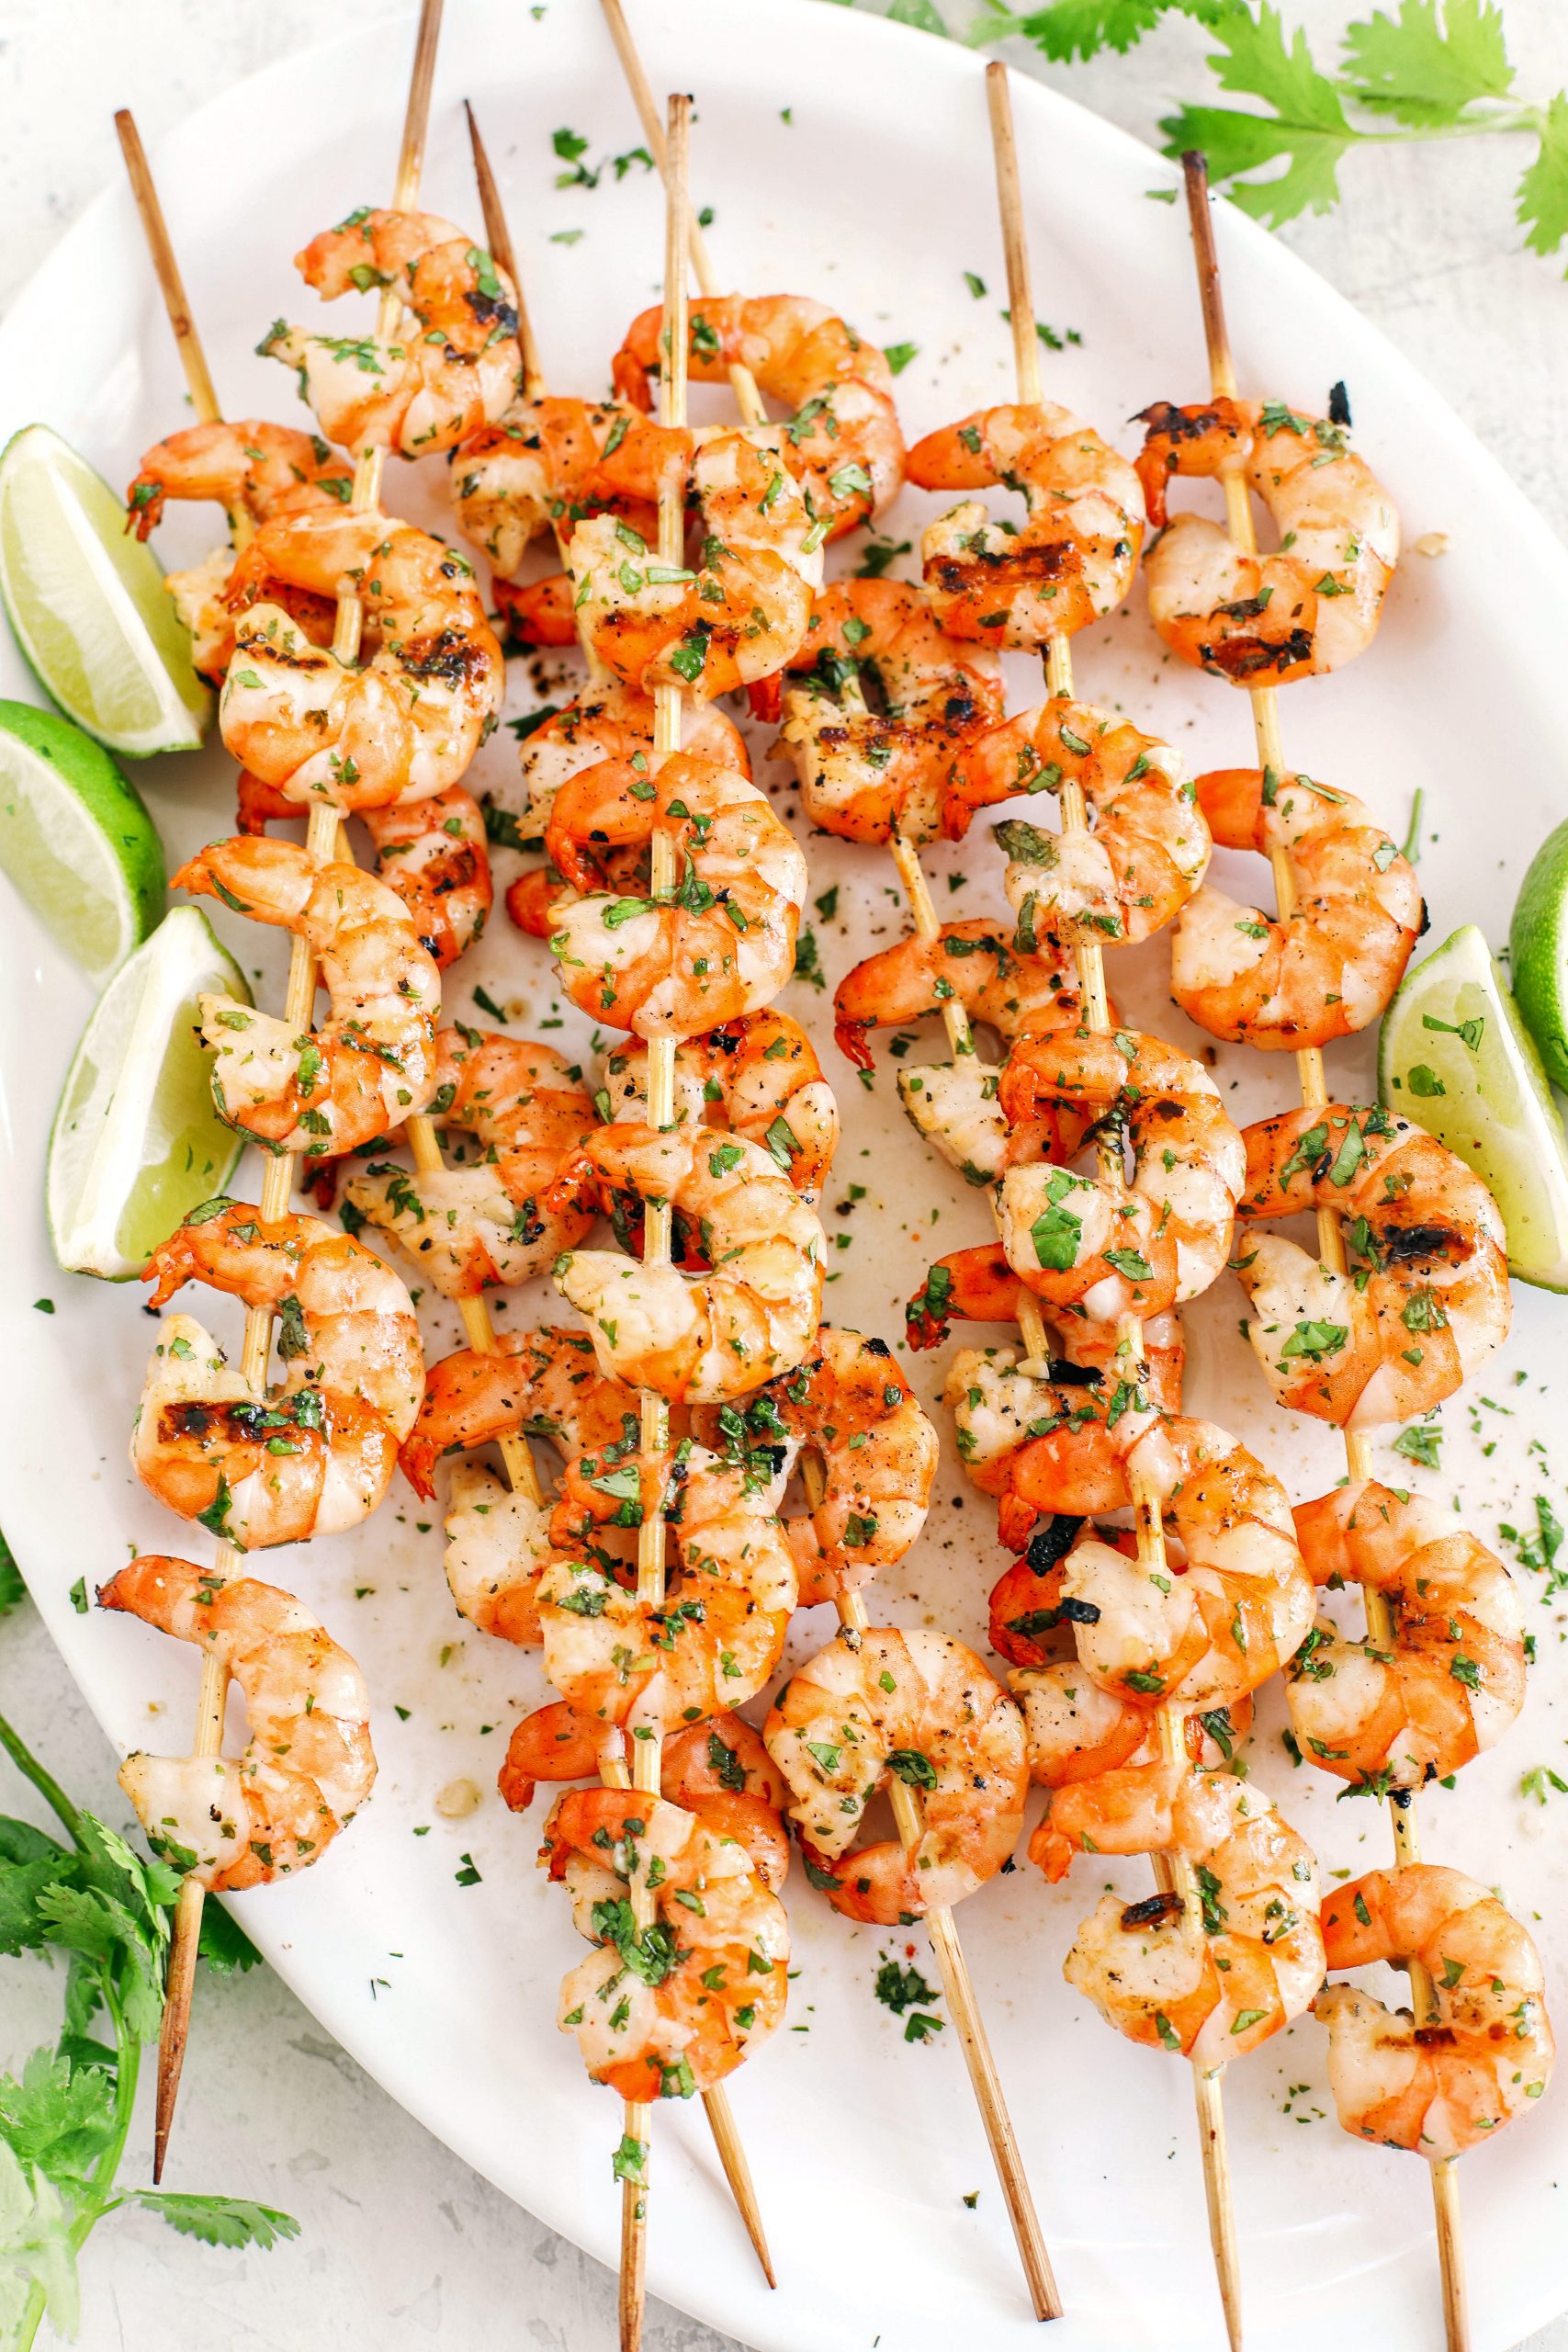 These Margarita Shrimp Skewers make the perfect summer meal that is light, healthy and marinated in garlic, fresh lime juice, cilantro and of course, tequila!  